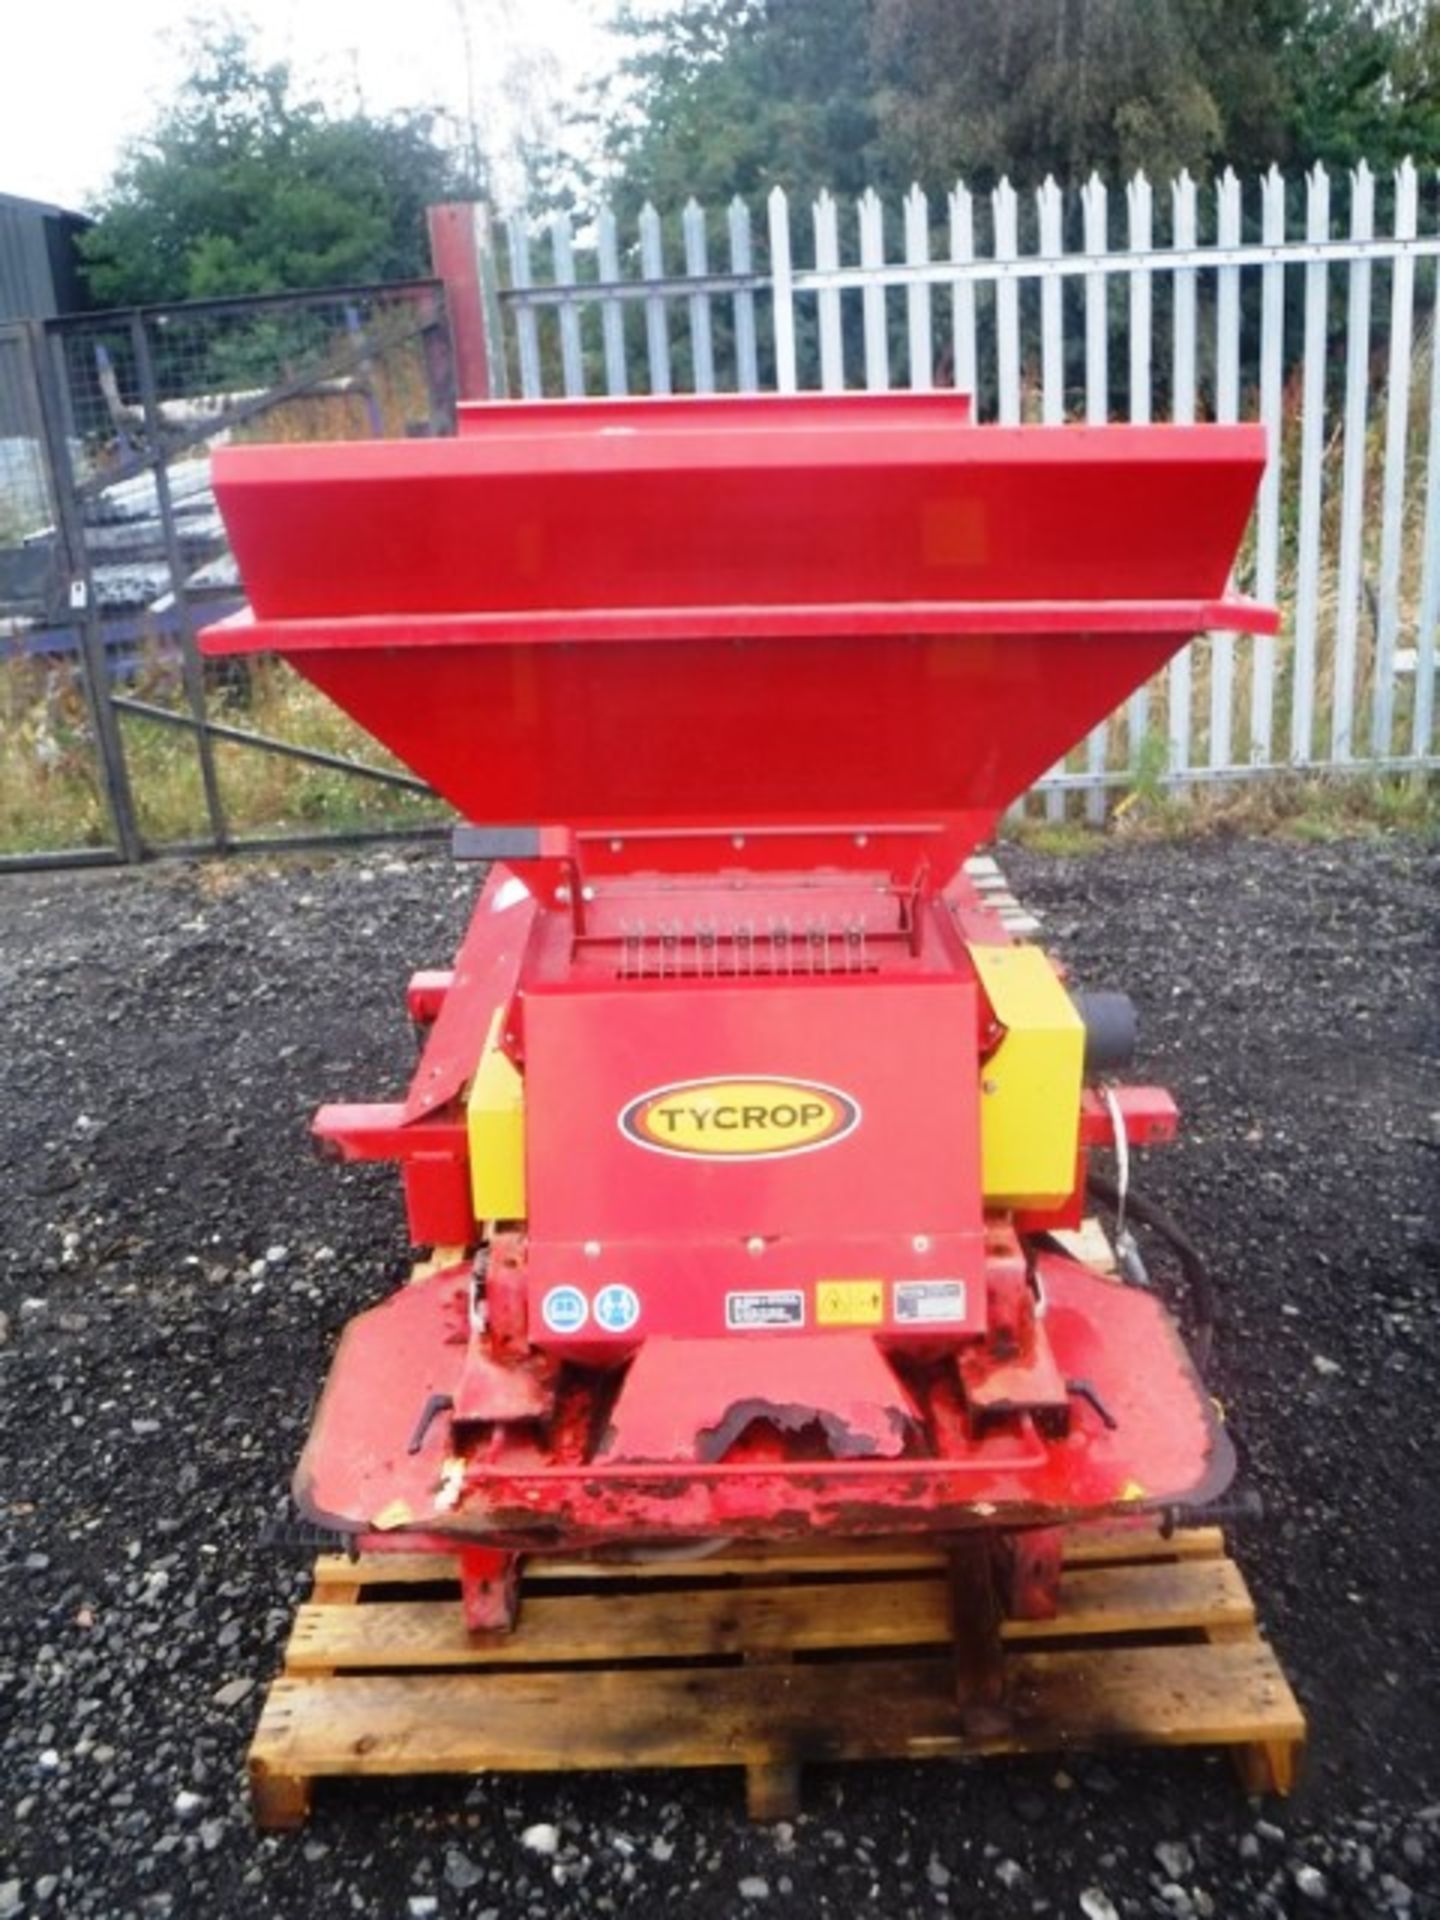 TYCROP PRO pass mounted spreader. S/N 20968100035786 - Image 2 of 6